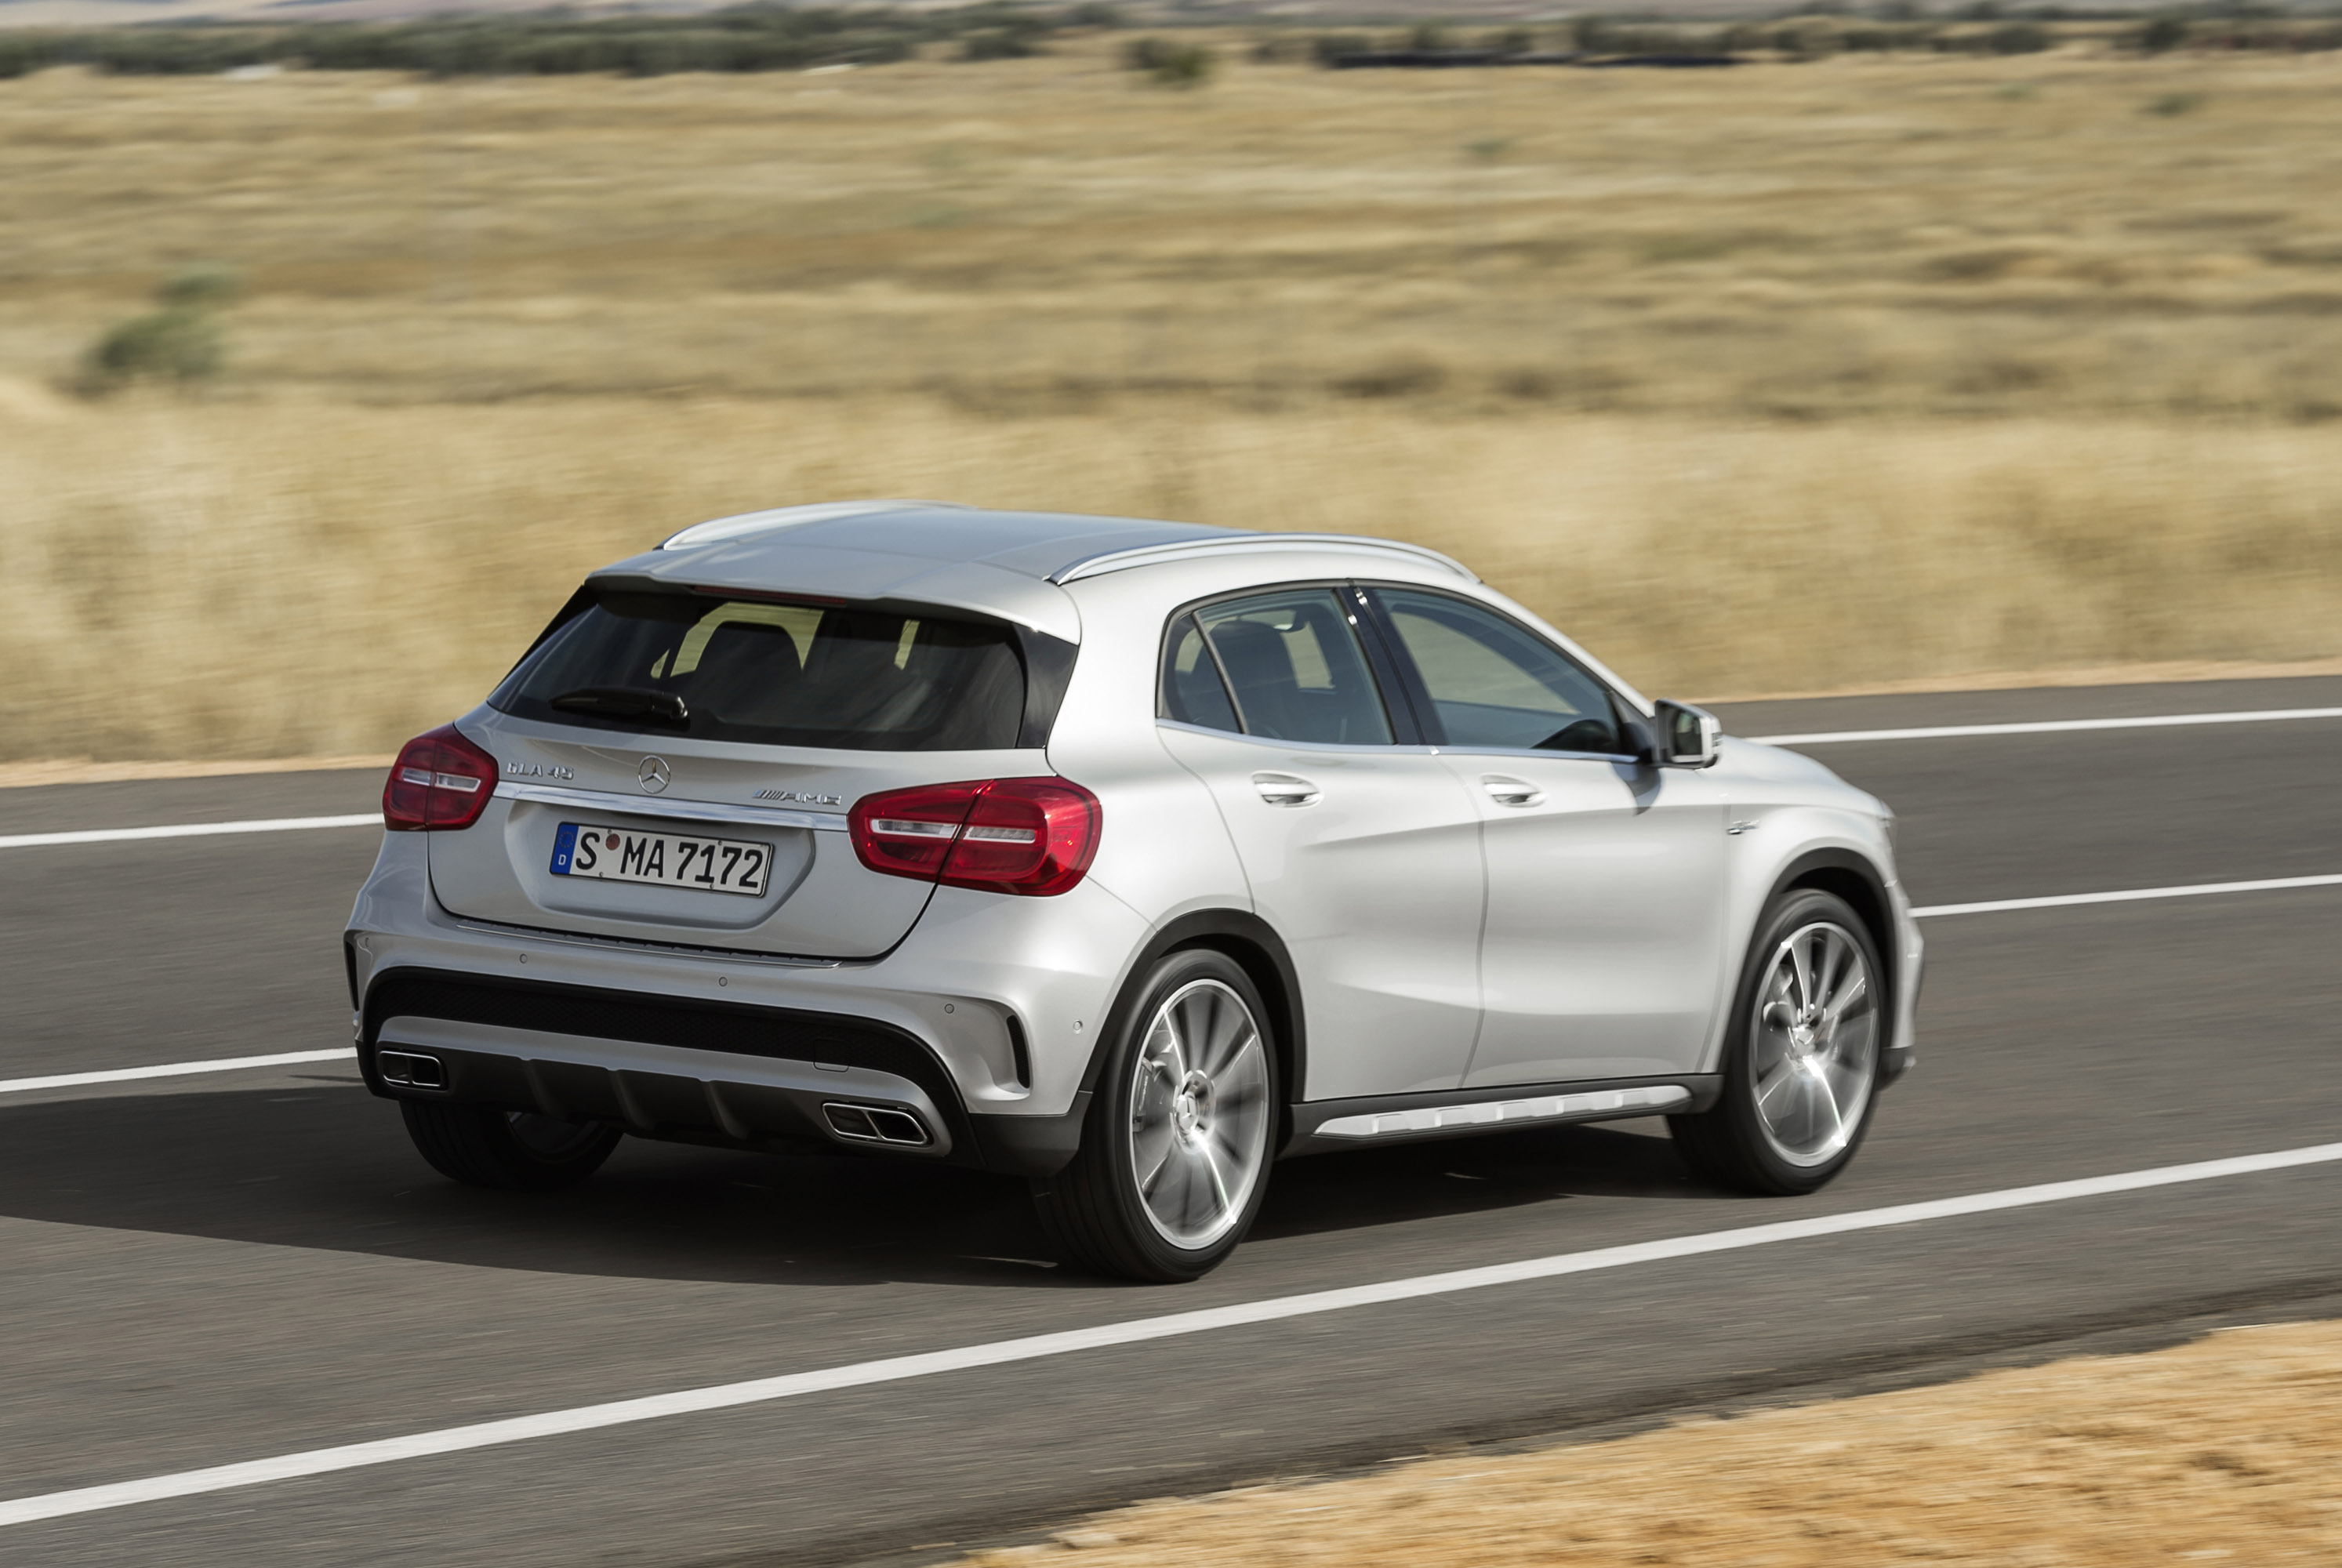 Mercedes GLA-Class (H247) mod specifications